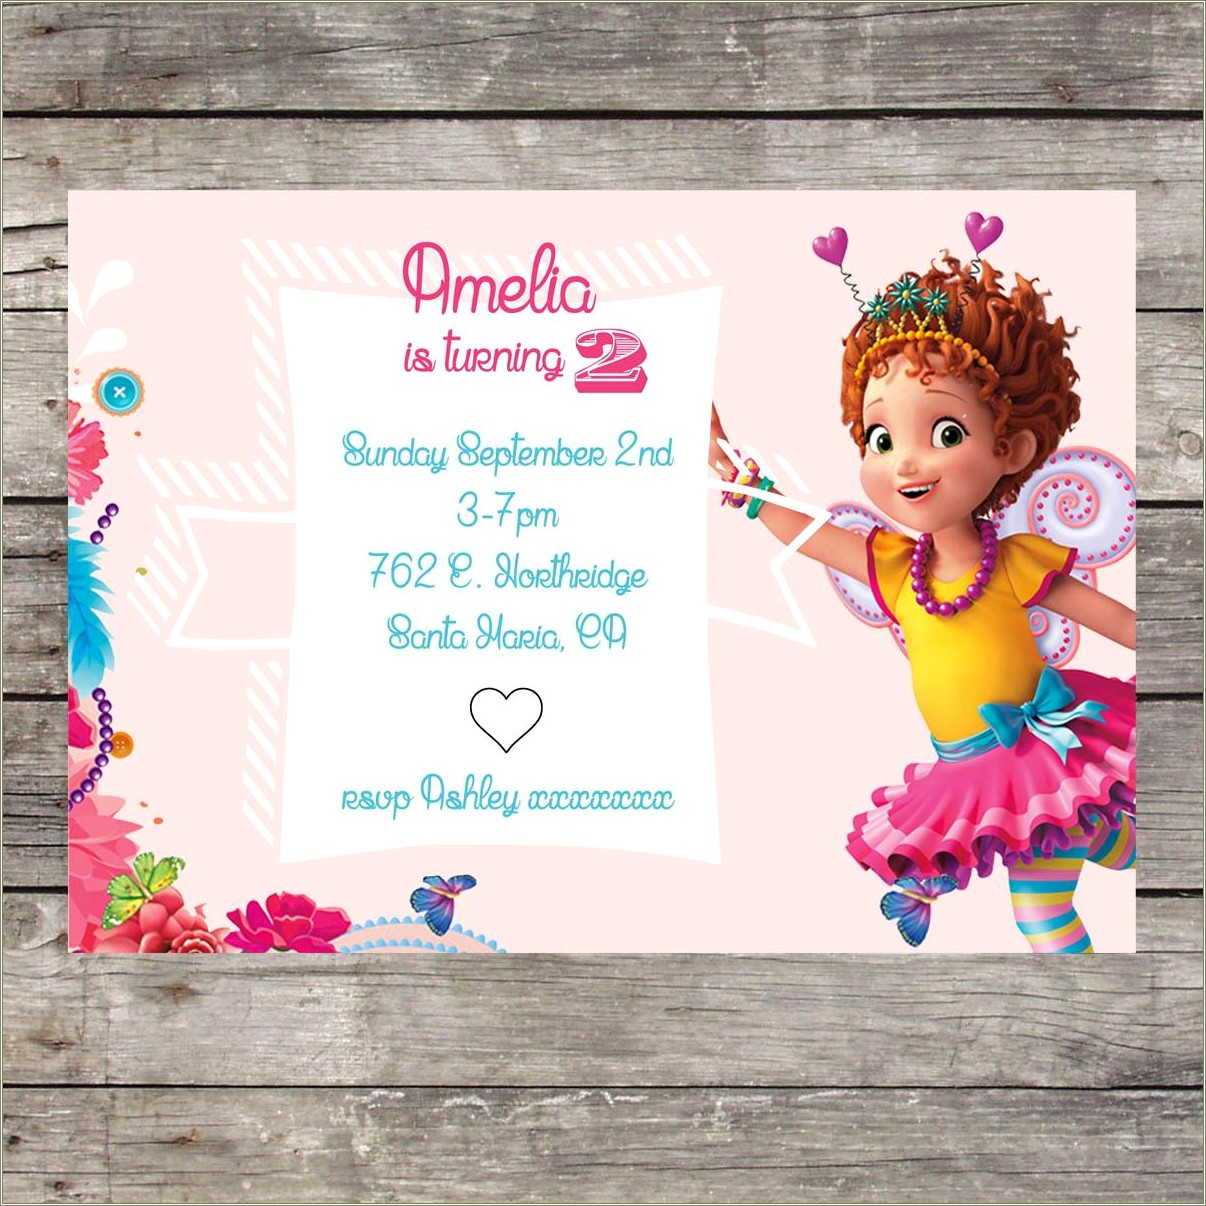 Free Fancy Nancy Party Invitations Templates